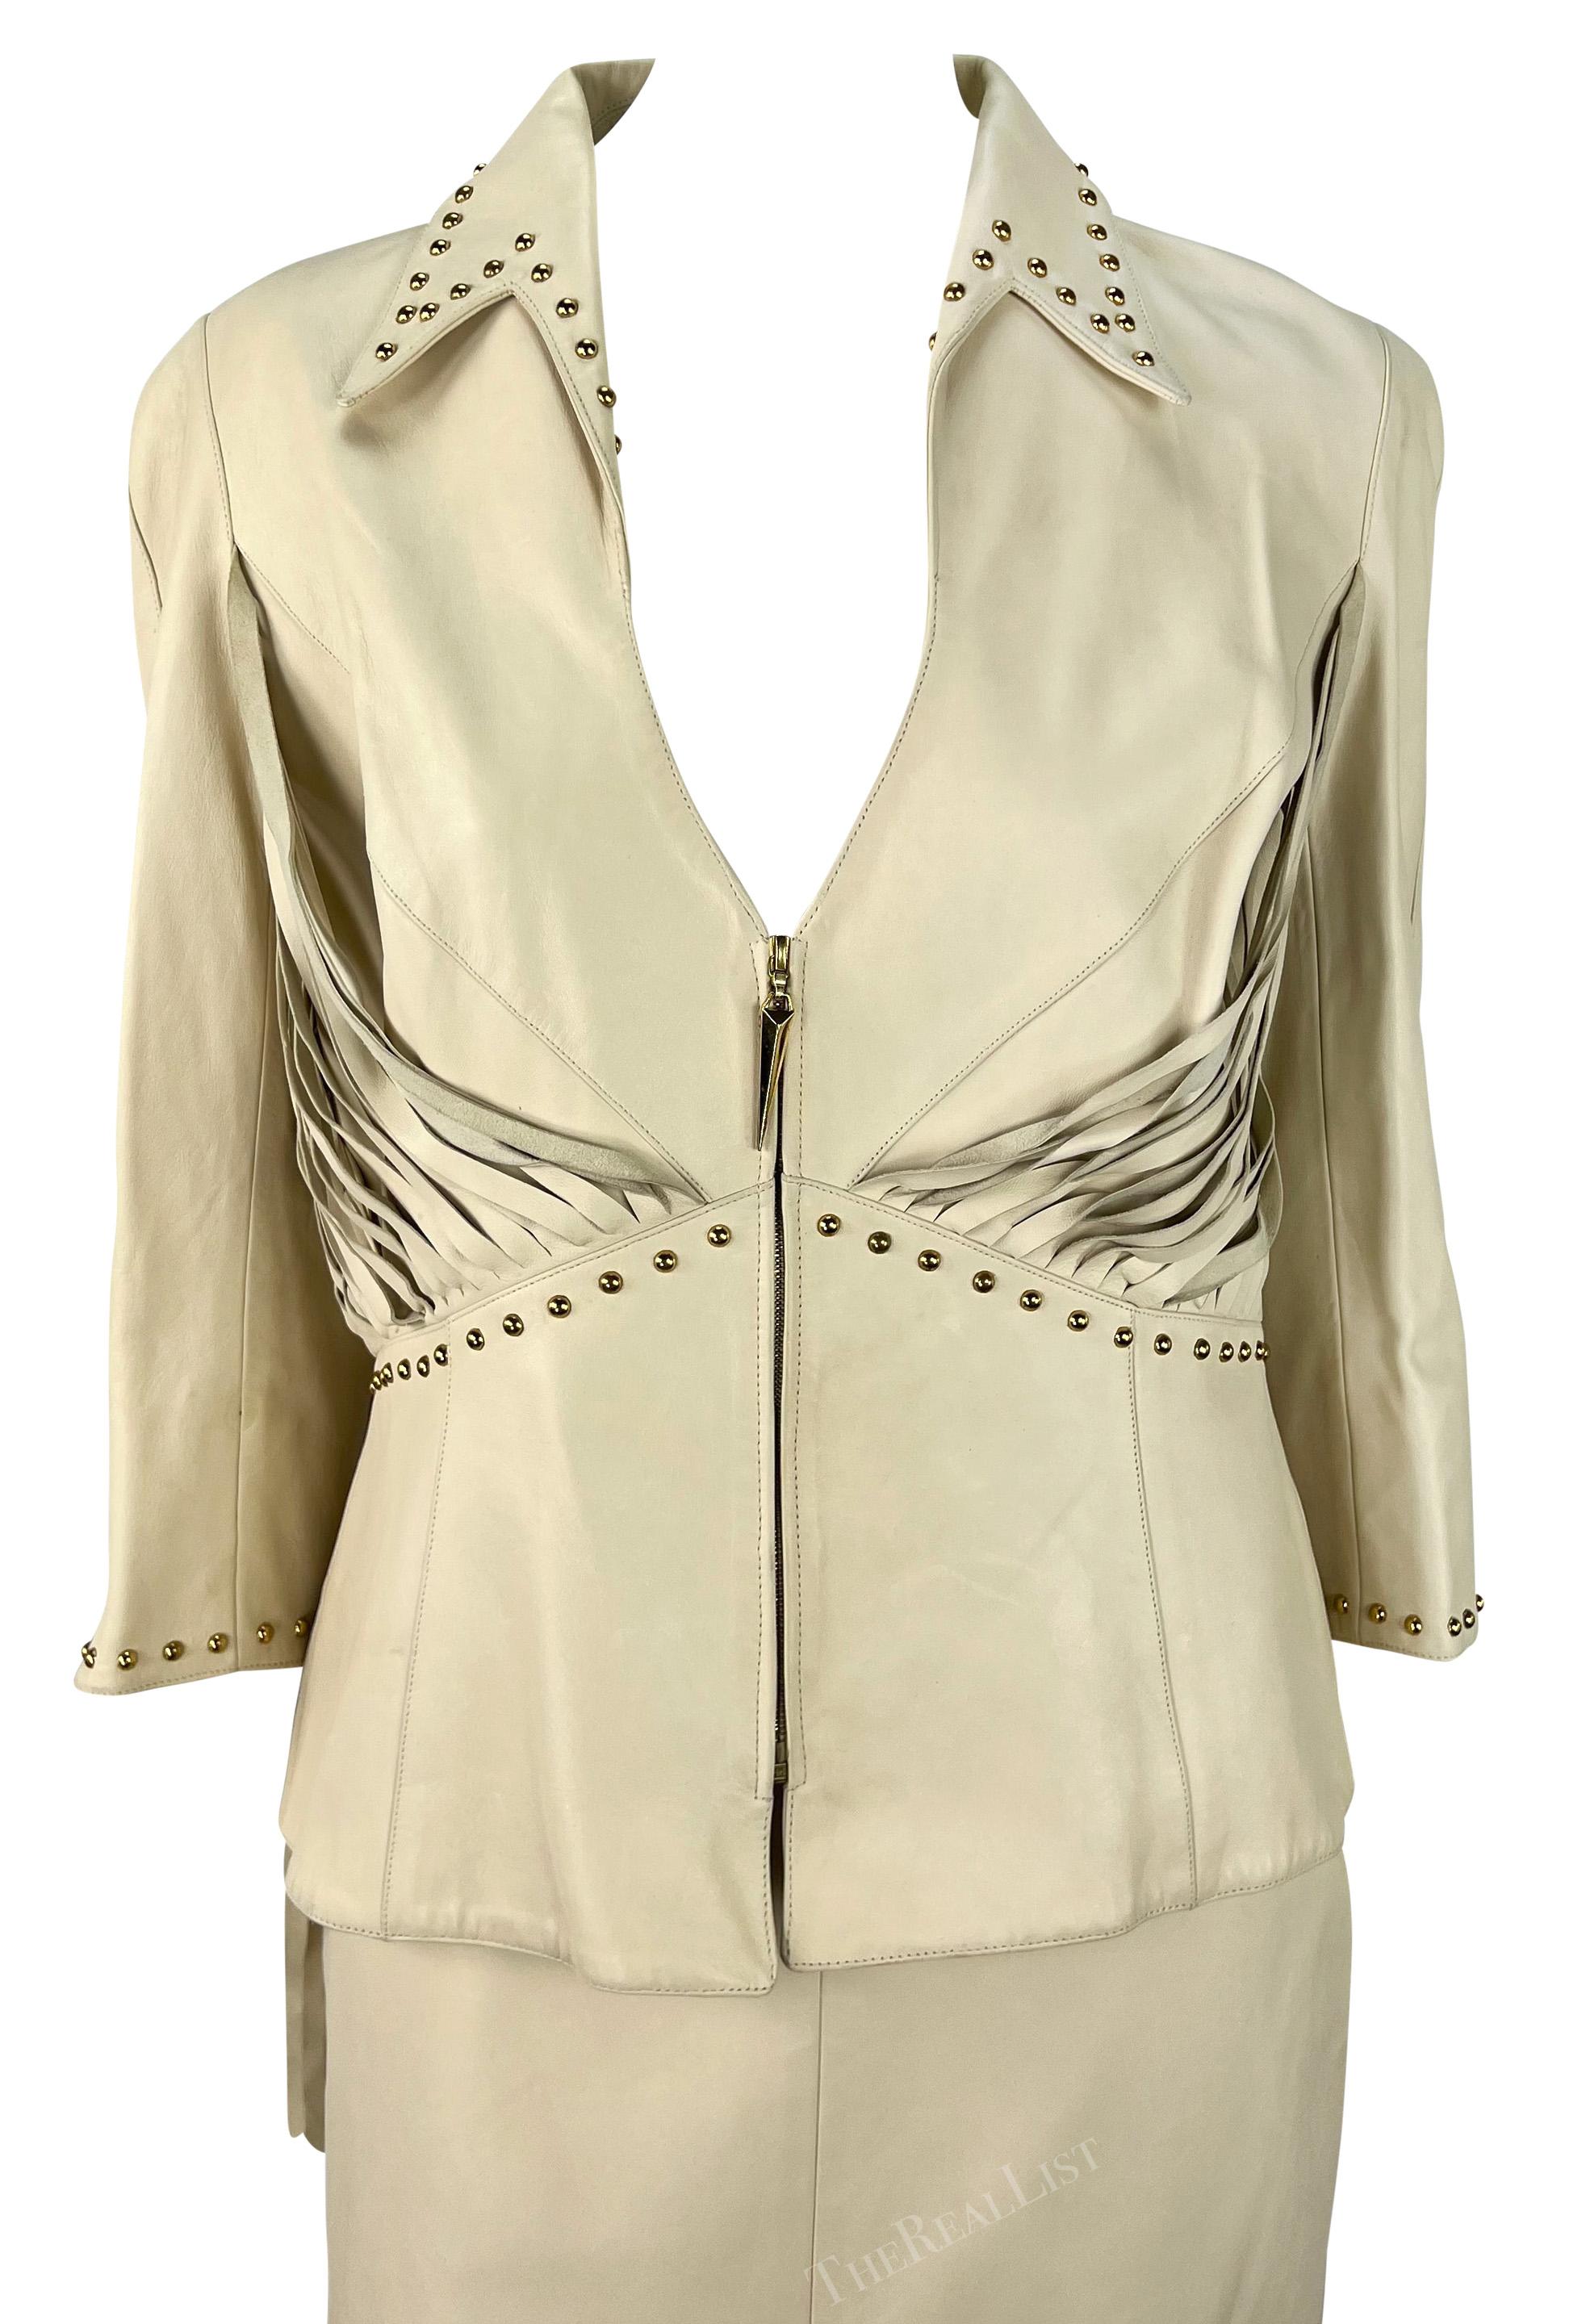 Early 2000s Thierry Mugler Couture Studded Beige Leather Fringe Skirt Suit For Sale 2